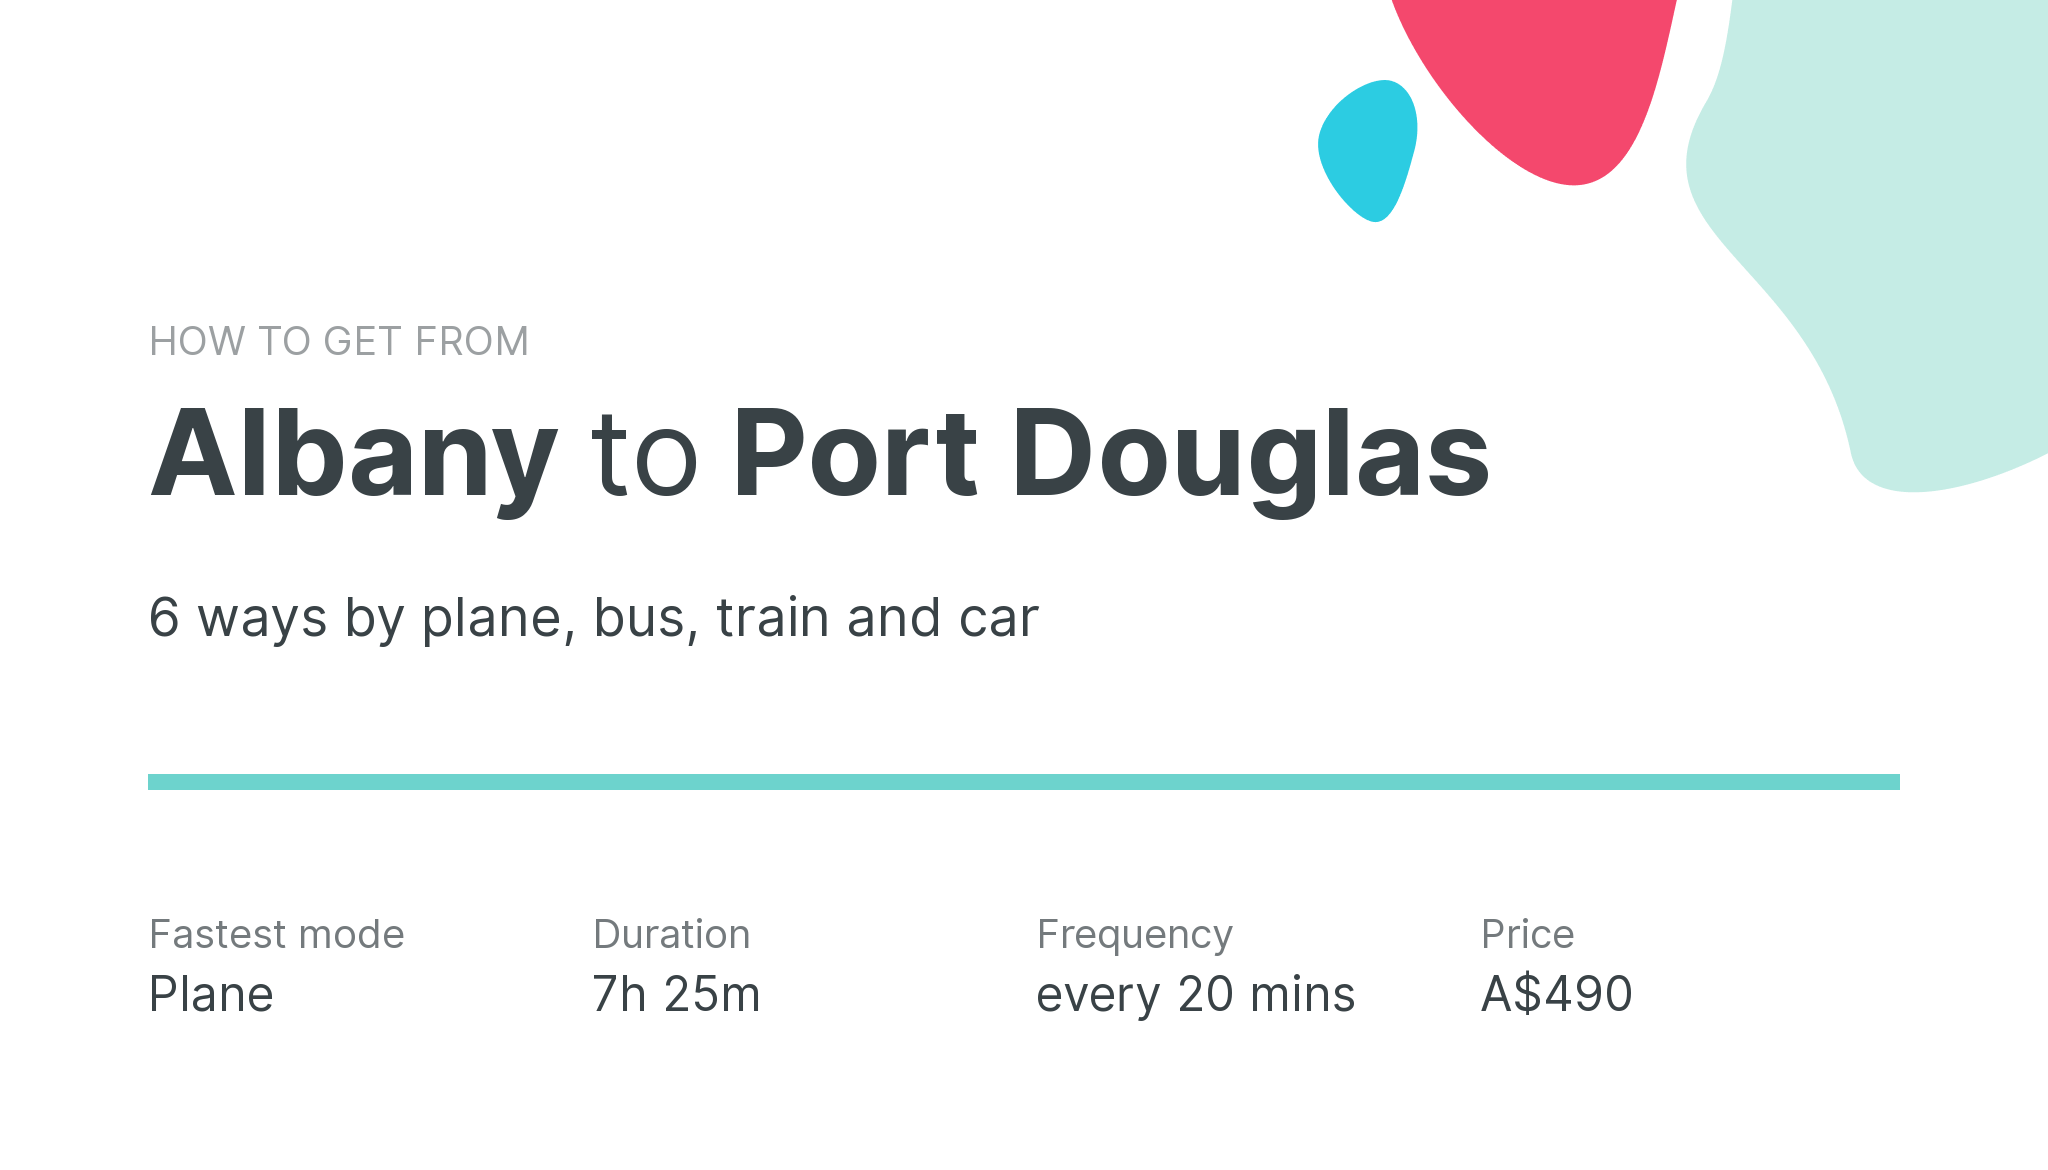 How do I get from Albany to Port Douglas